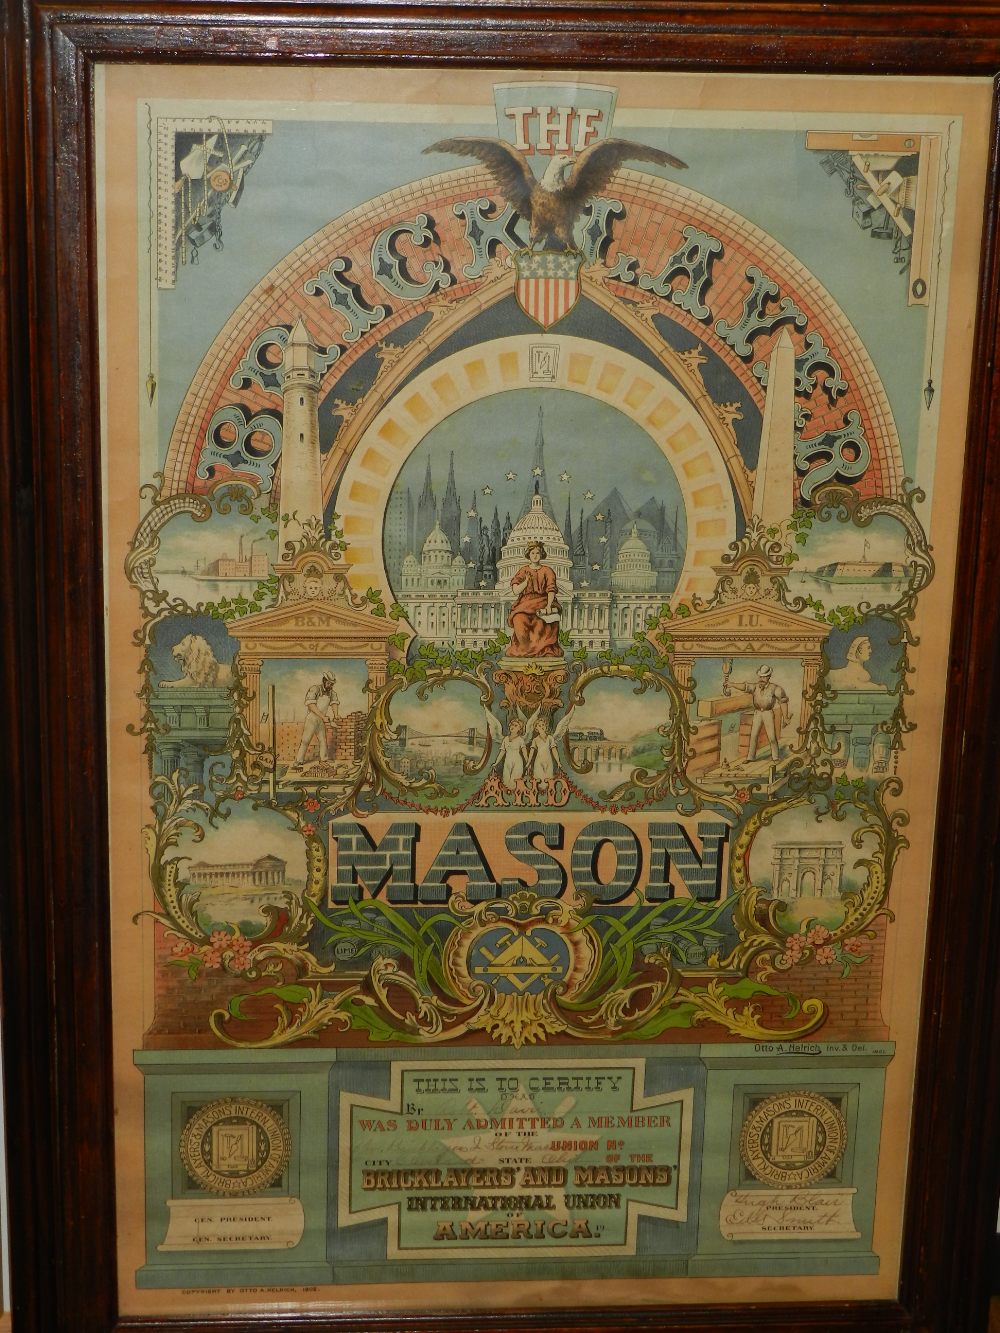 An early 20th century certificate for membership of the Bricklayers and Masons International Union